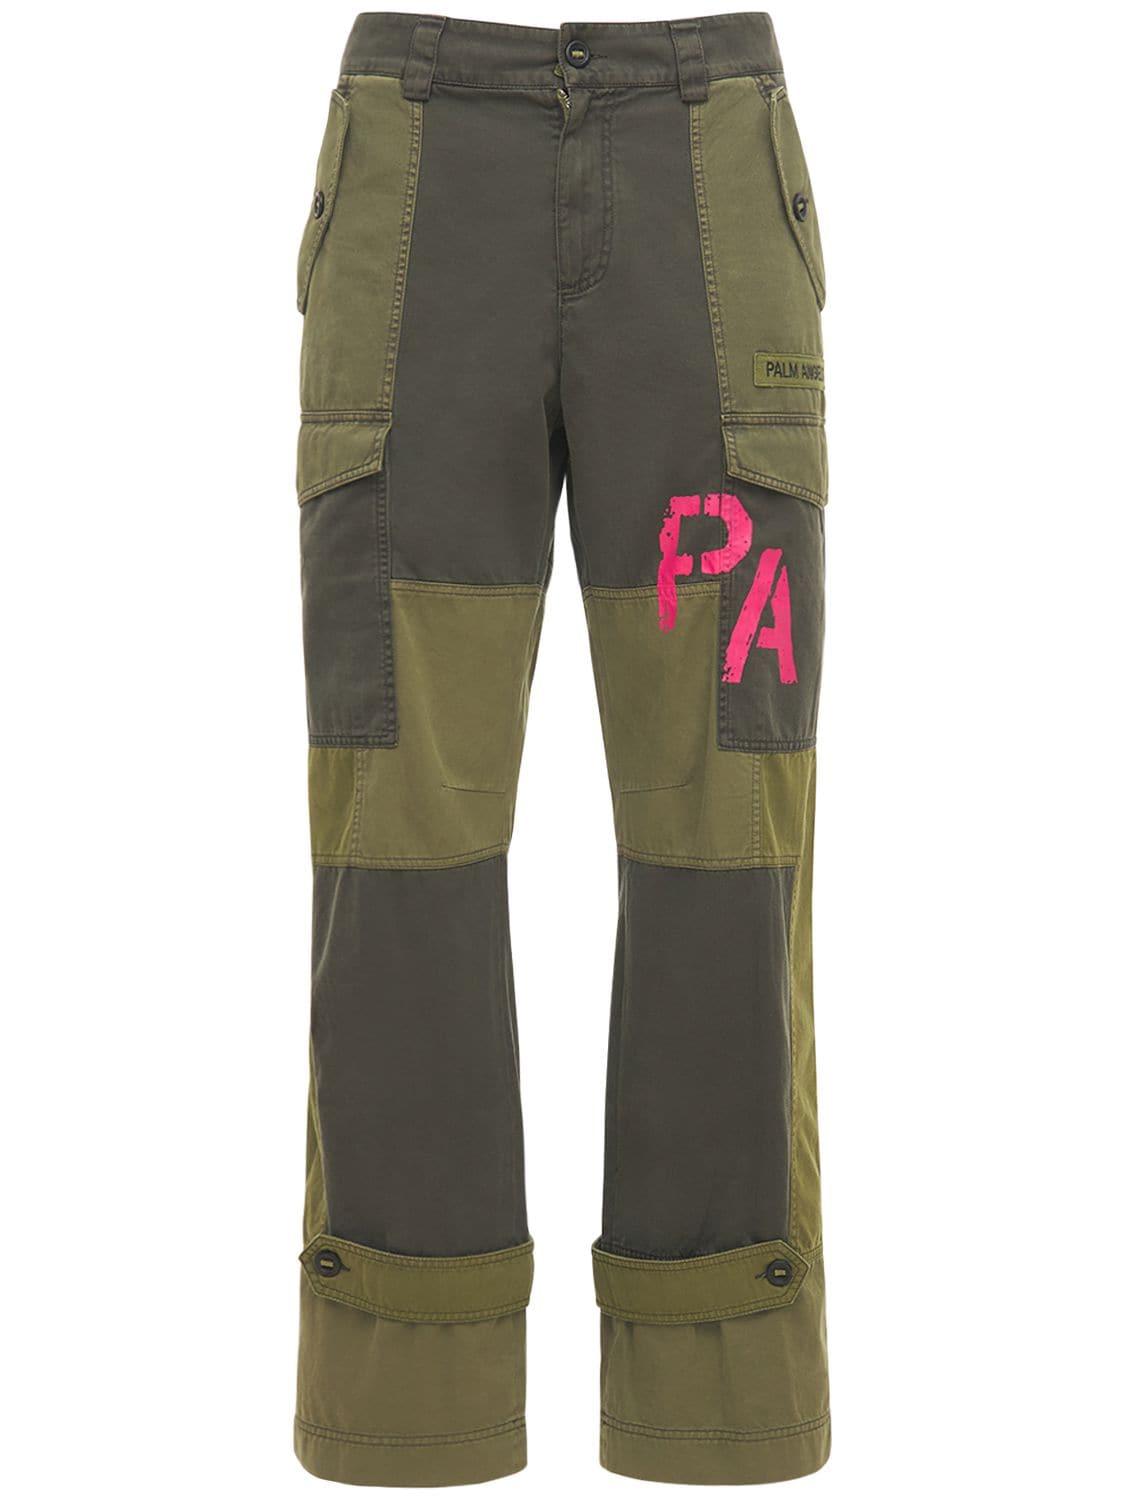 PALM ANGELS PATCHWORK MILITARY CANVAS CARGO PANTS,73IJRV012-NTYZMG2